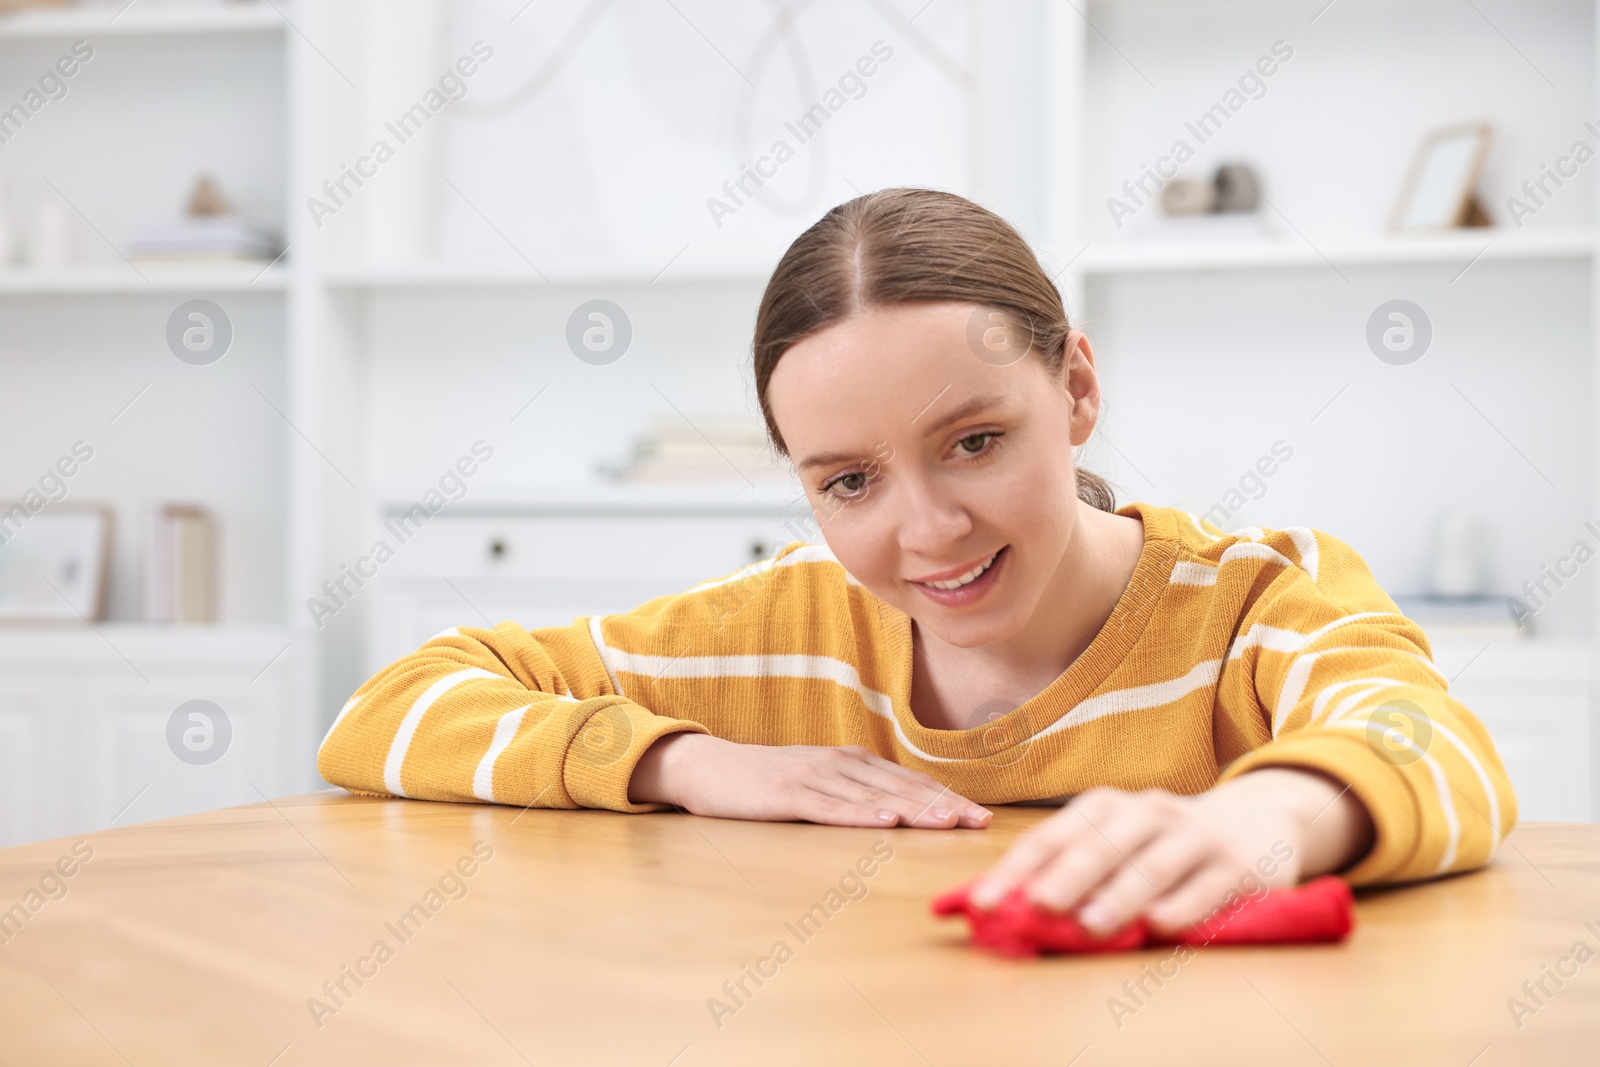 Photo of Woman cleaning wooden table with rag indoors